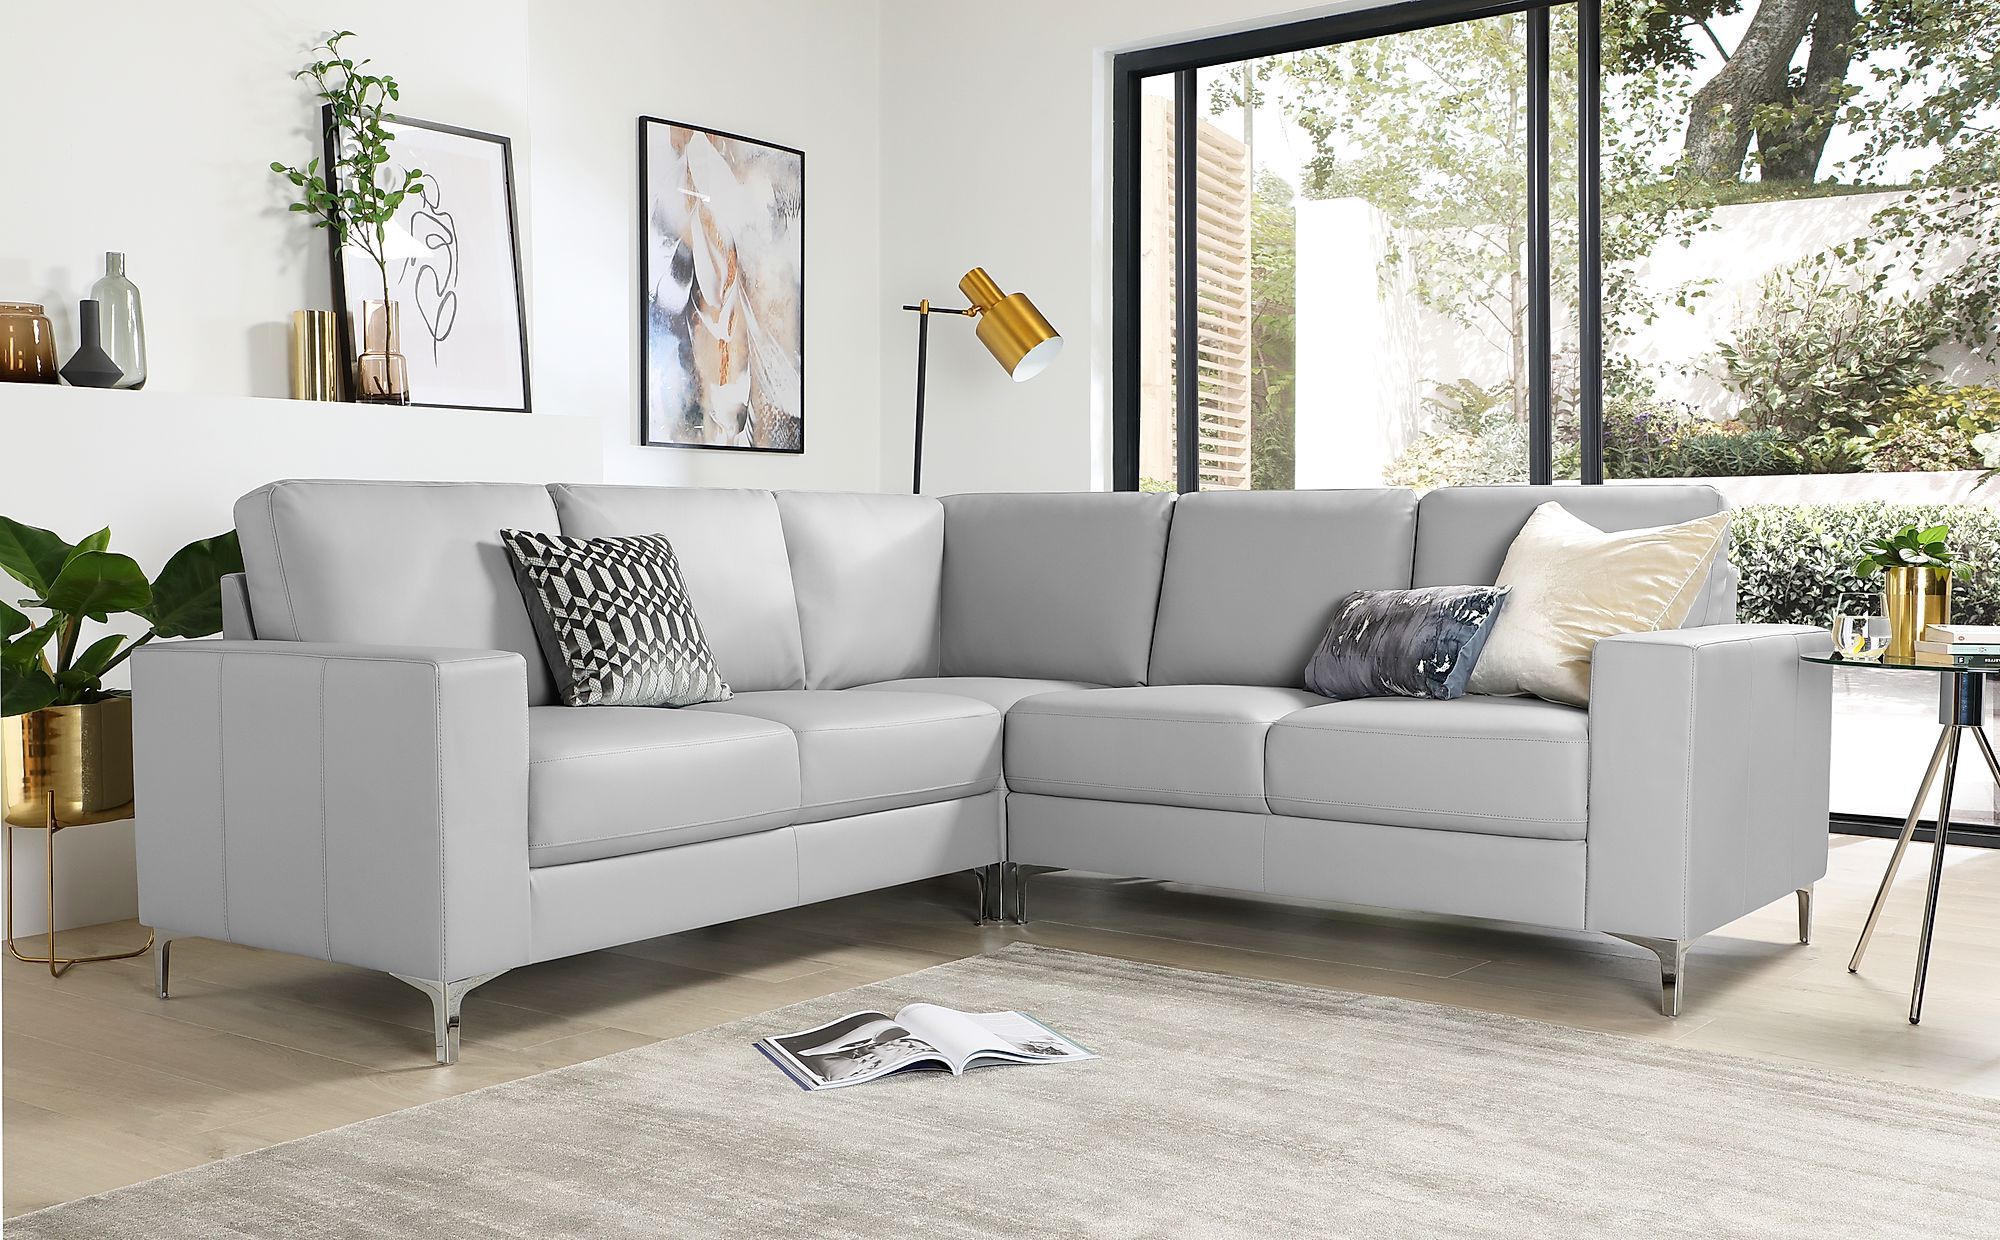 Baltimore Light Grey Leather Corner Sofa | Furniture Choice With Sofas In Light Gray (View 12 of 20)